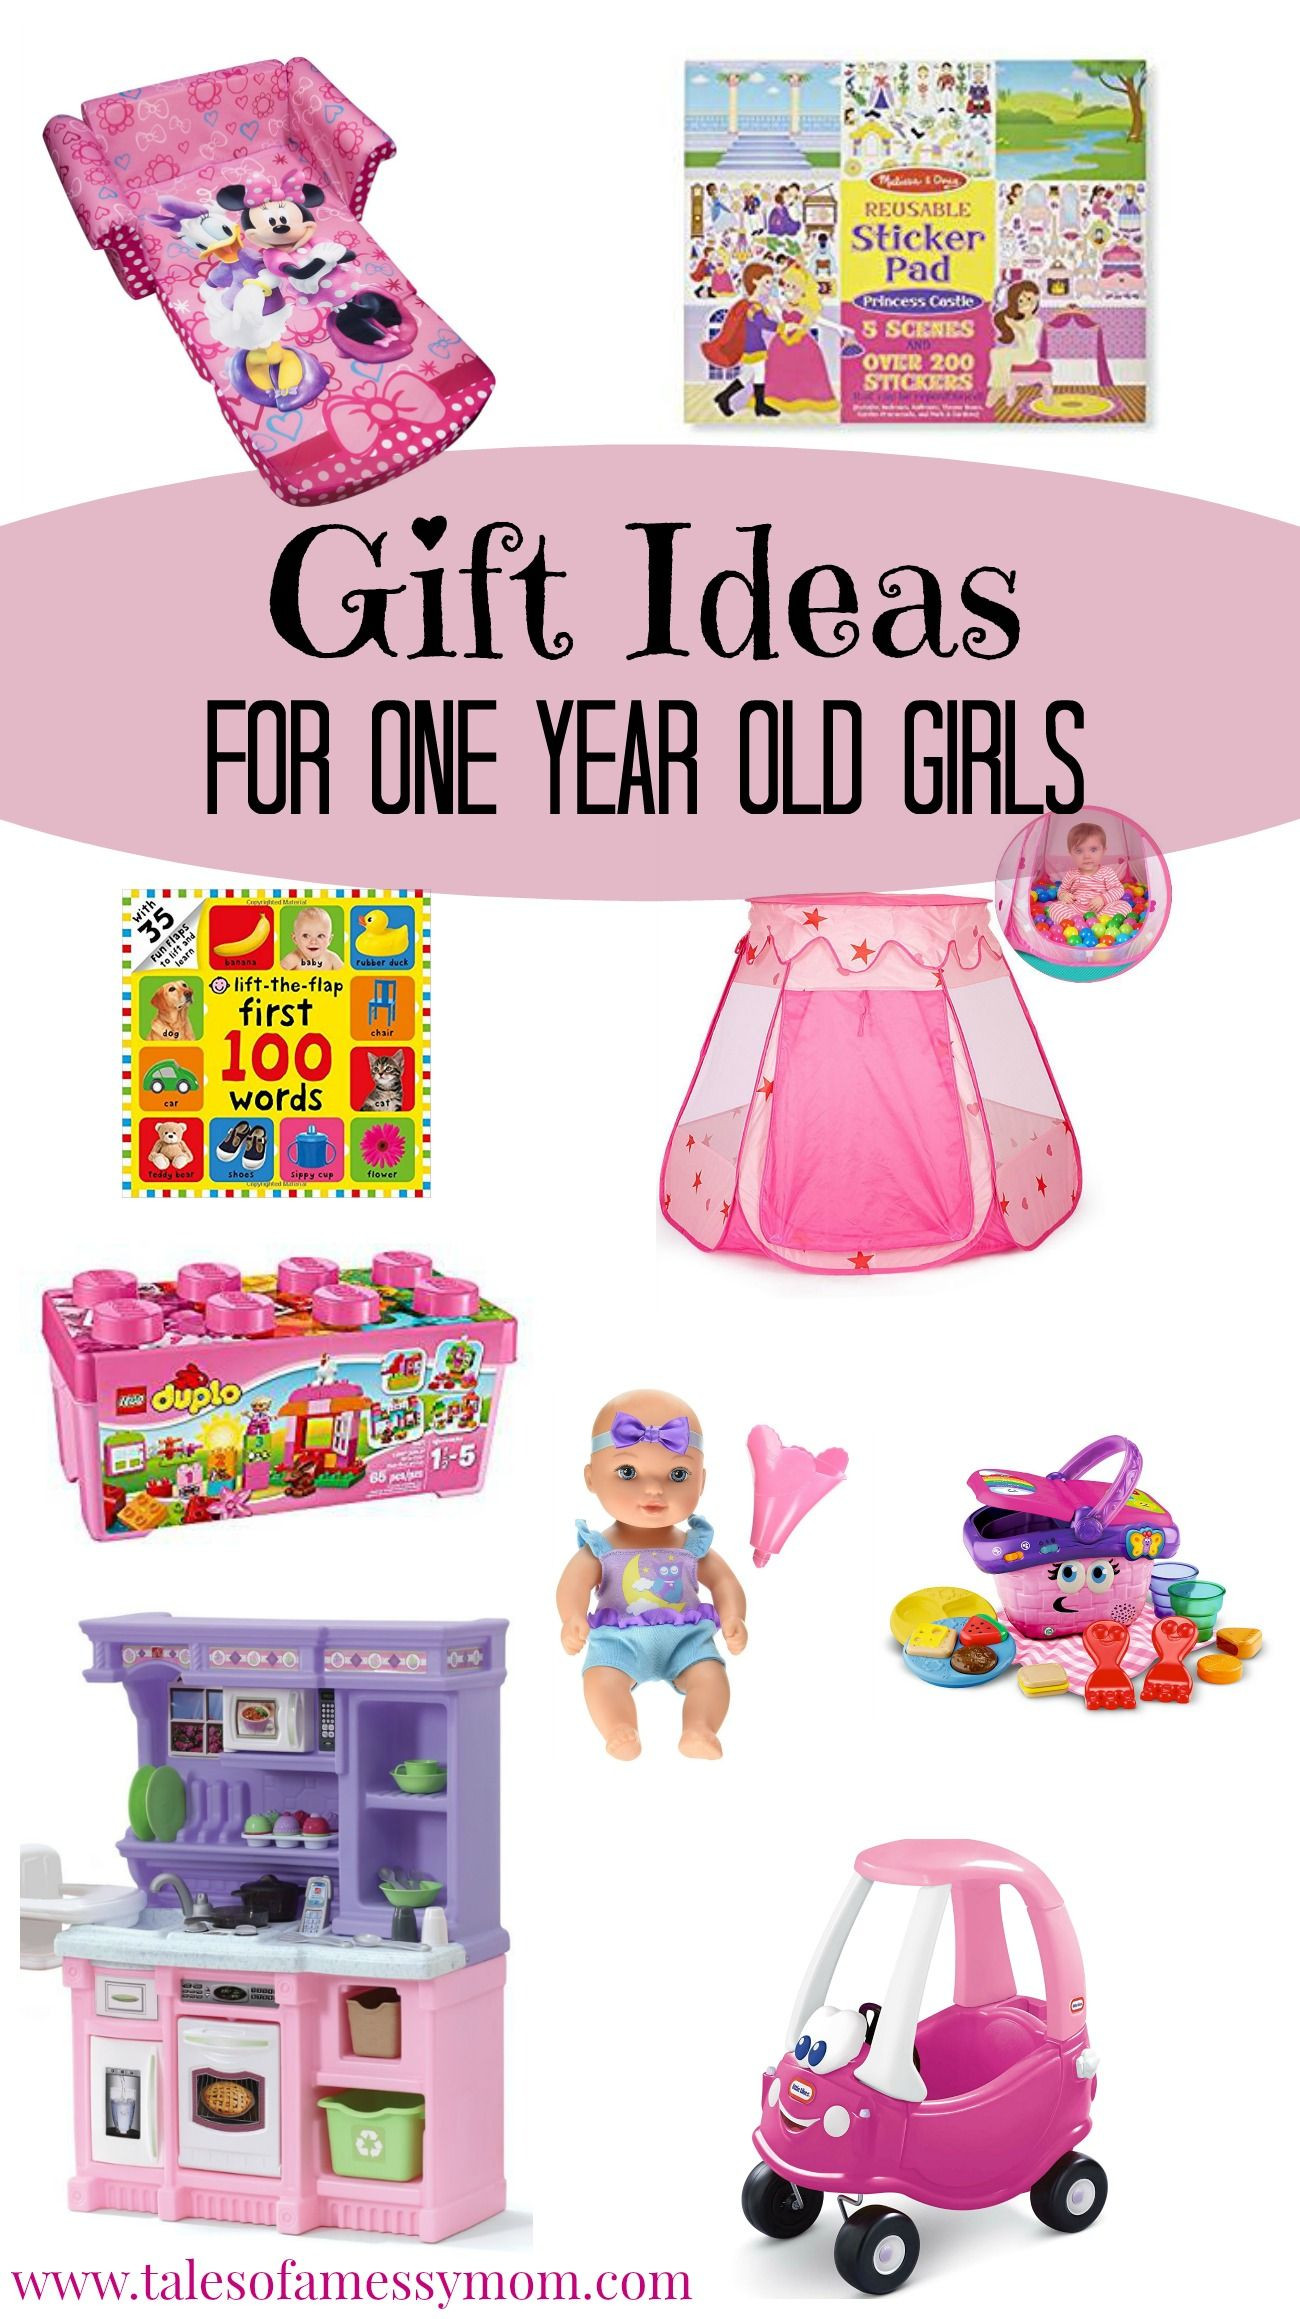 Gift Ideas For 1 Year Baby Girl
 Gift Ideas for e Year Old Girls